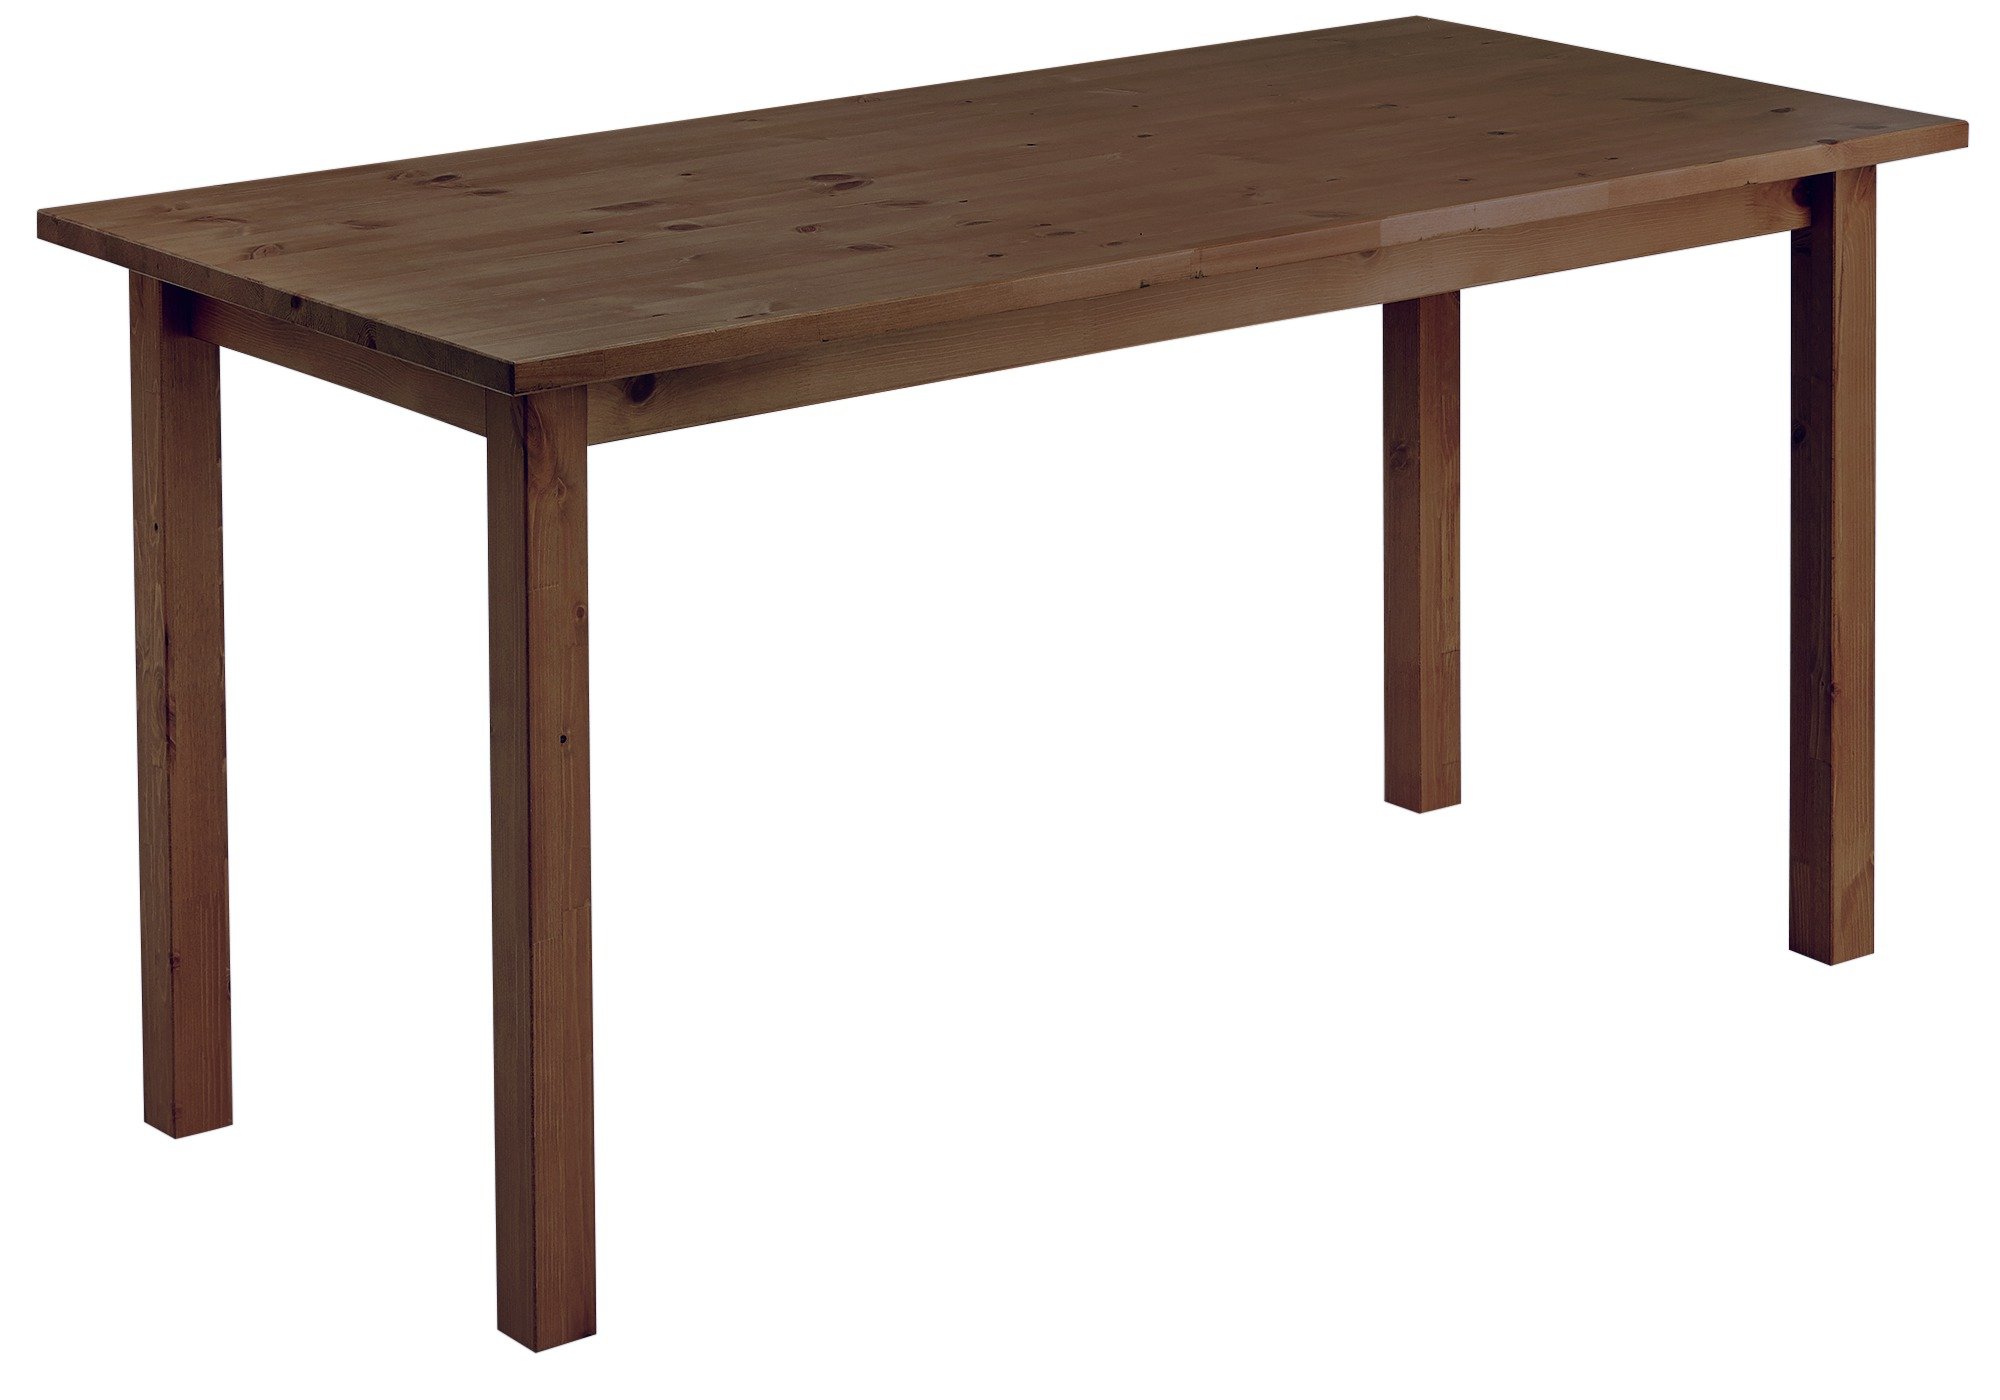 Argos Home Ashdon Solid Pine 6 Seater Dining Table - Walnut